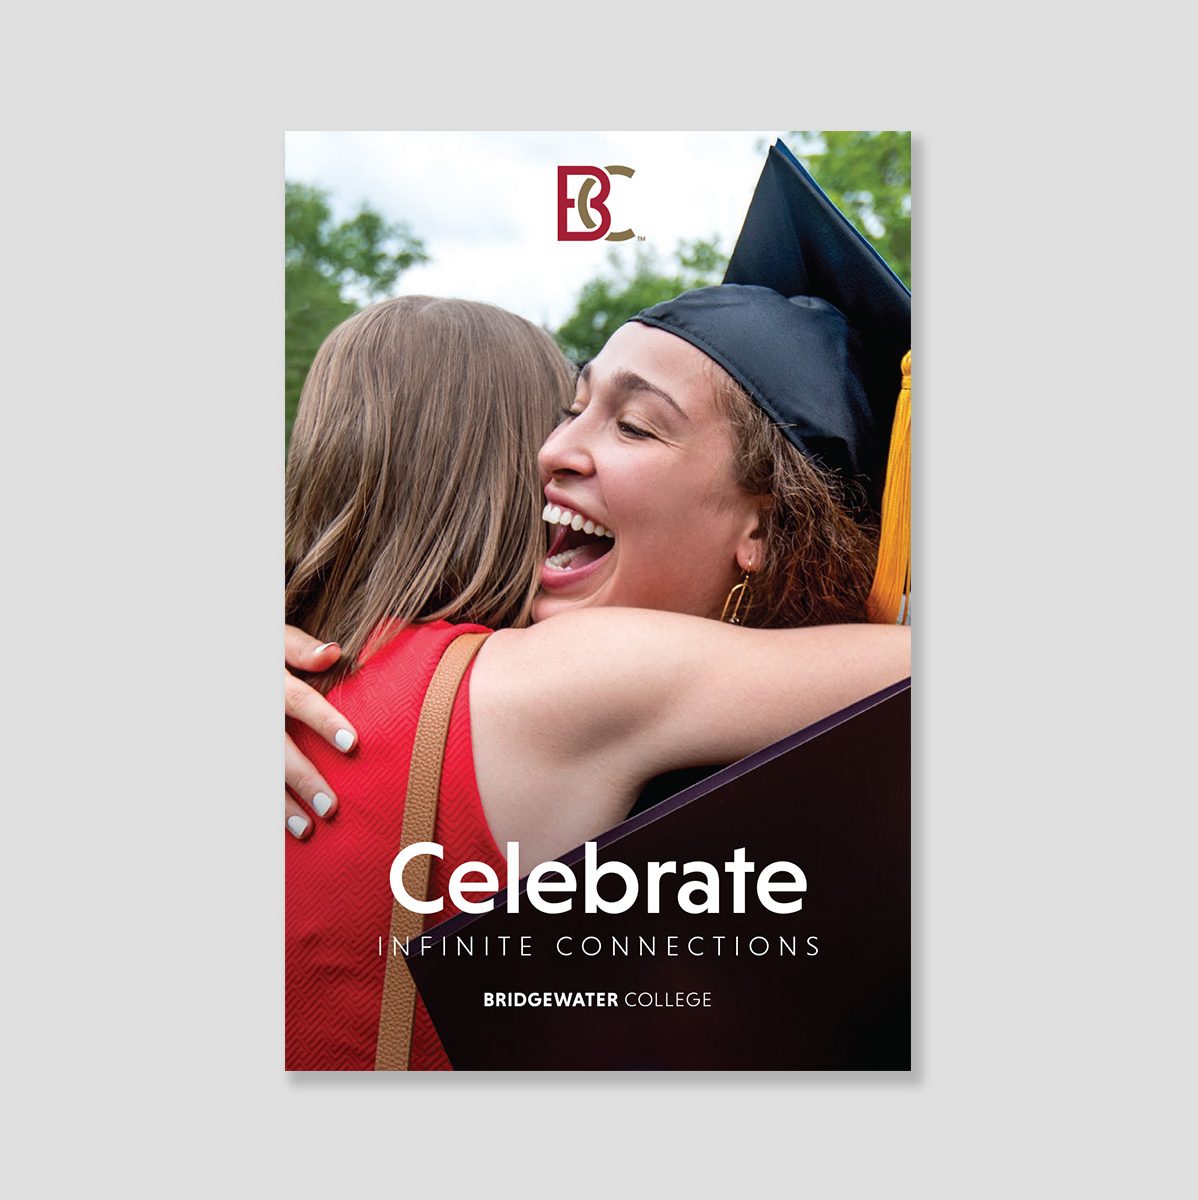 Brochure cover showing two women hugging, one wearing a graduation cap and gown. Text: Celebrate infinite connections.